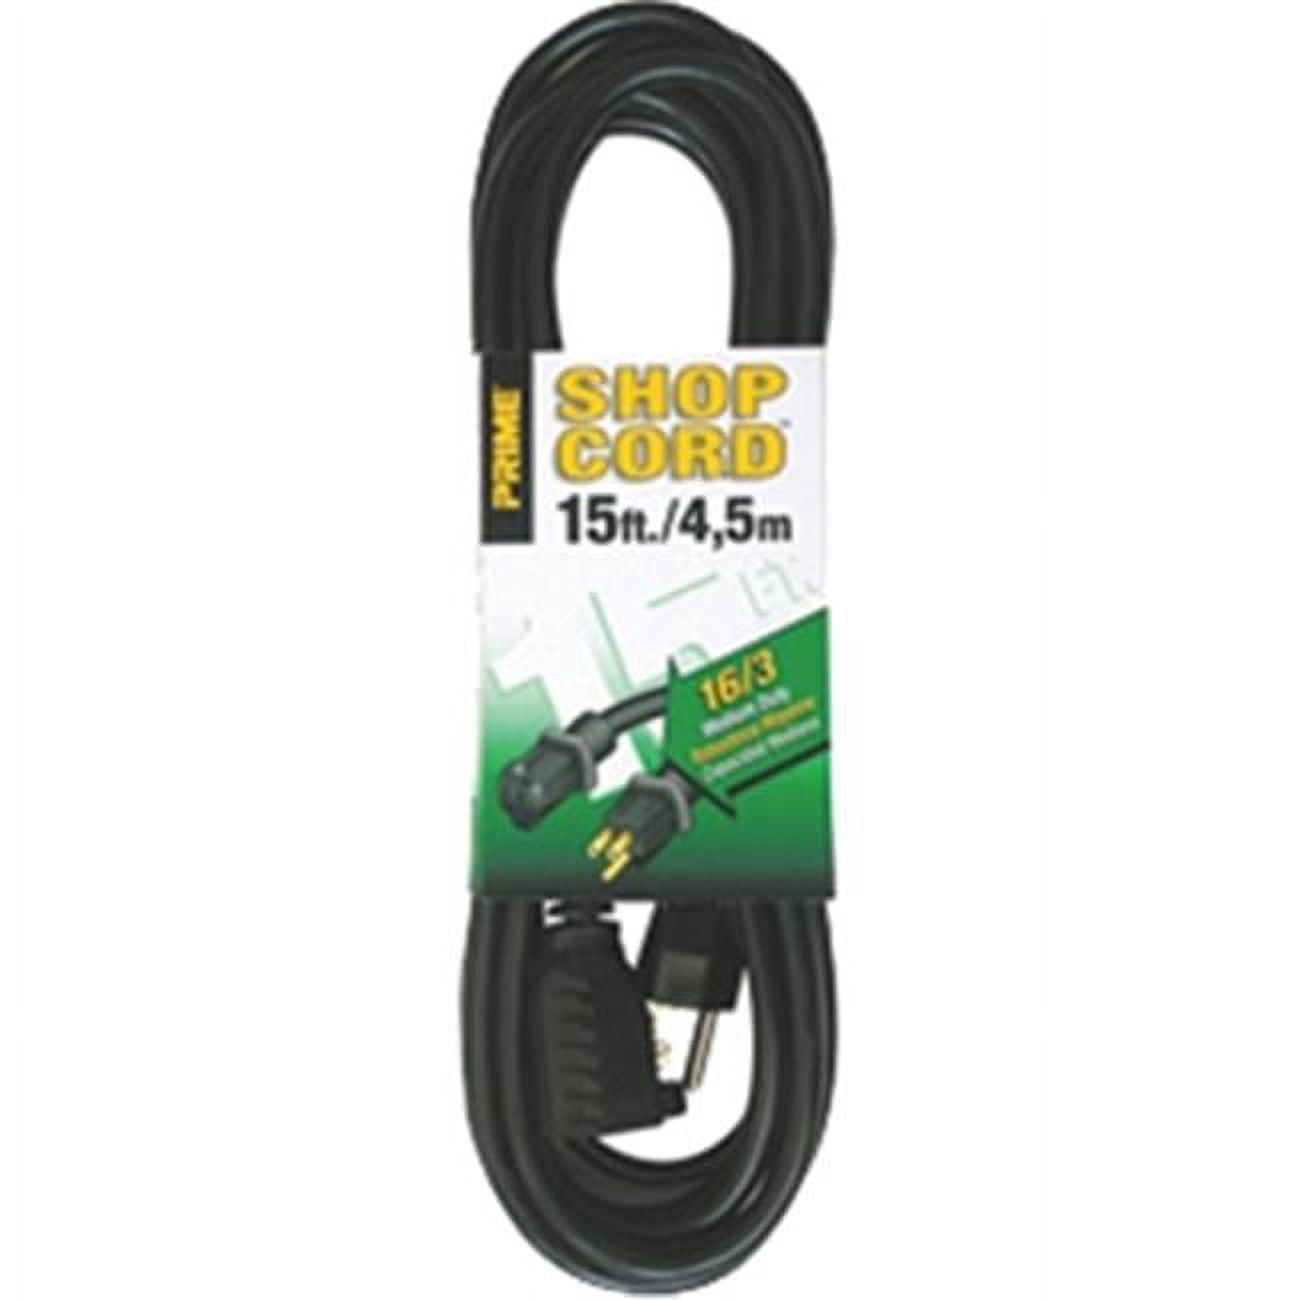 Prime Wire & Cable EC502615 15 ft. 16 - 03 - 15 SJTW Black Outdoor Extension Cord - image 1 of 2